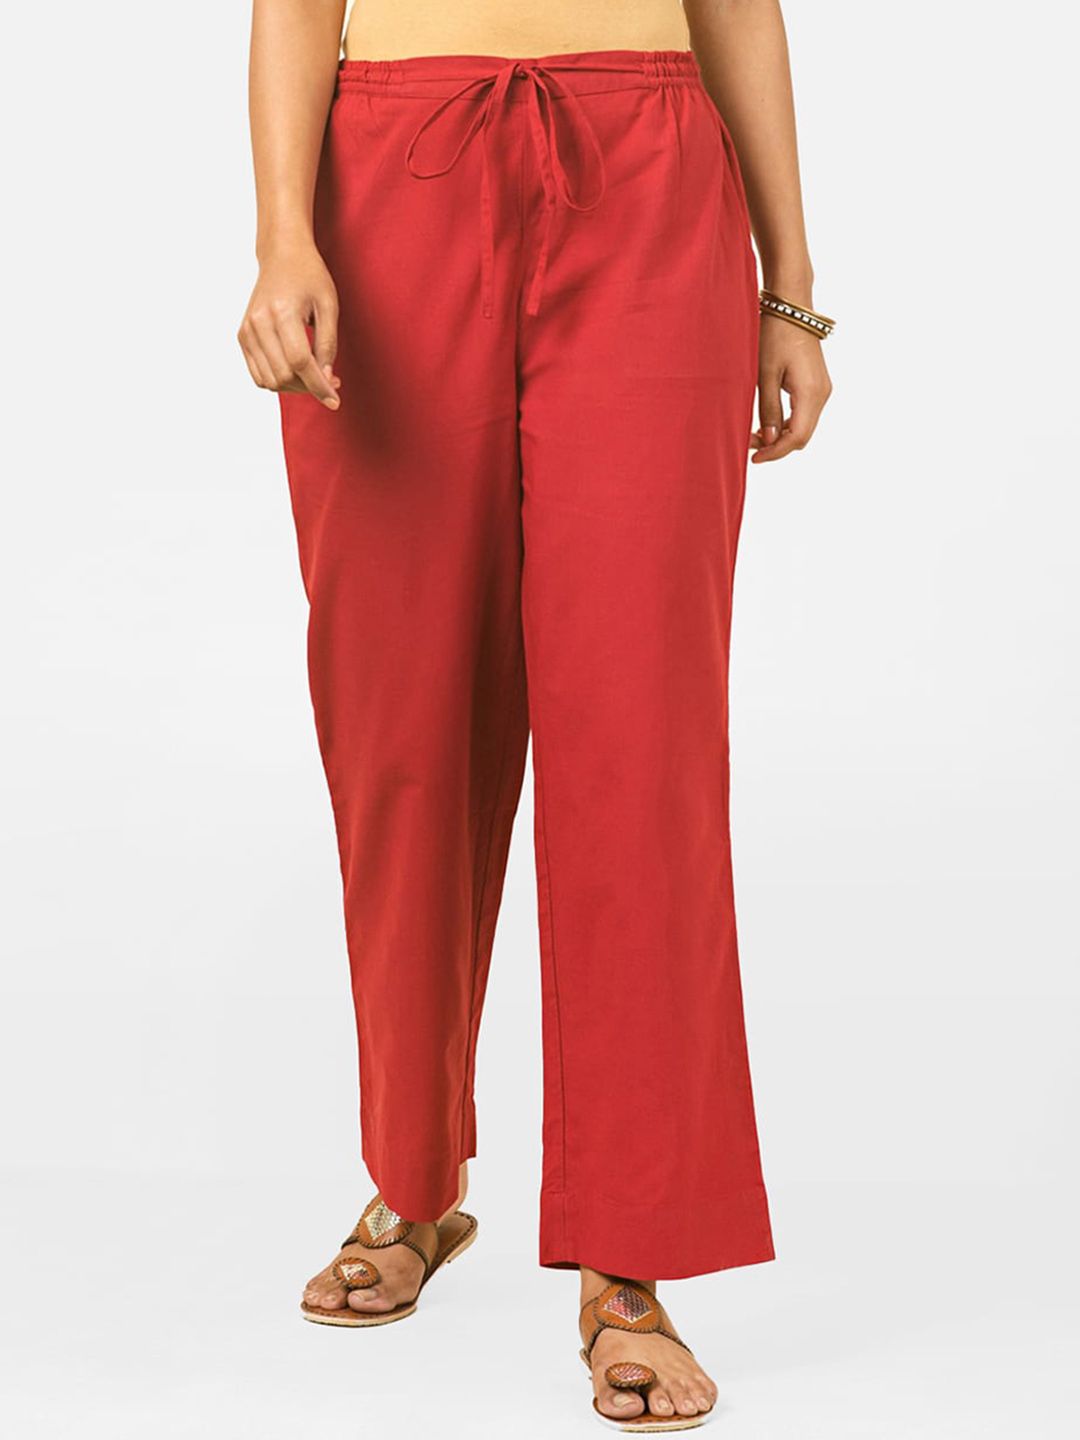 Fabindia Women Cotton Parallel Trousers Price in India